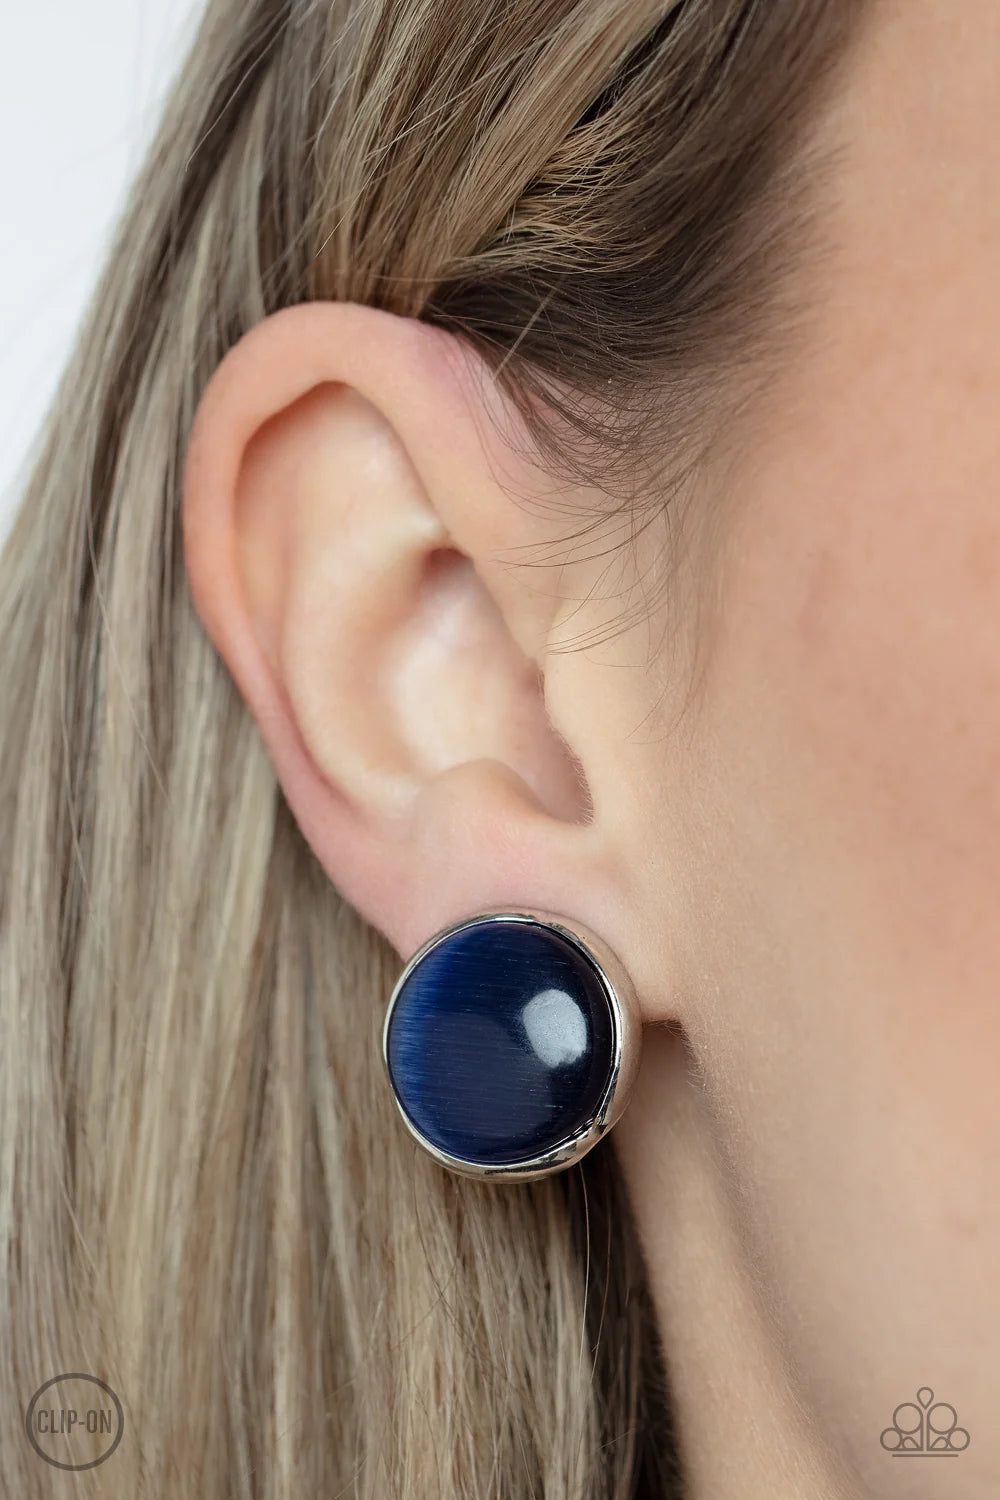 Paparazzi Accessories Cool Pools - Blue *Clip-On A blue cat's eye stone coolly shimmers inside an imperfect silver frame, resulting in an ethereal centerpiece. Earring attaches to a standard clip-on fitting. Sold as one pair of clip-on earrings. Jewelry